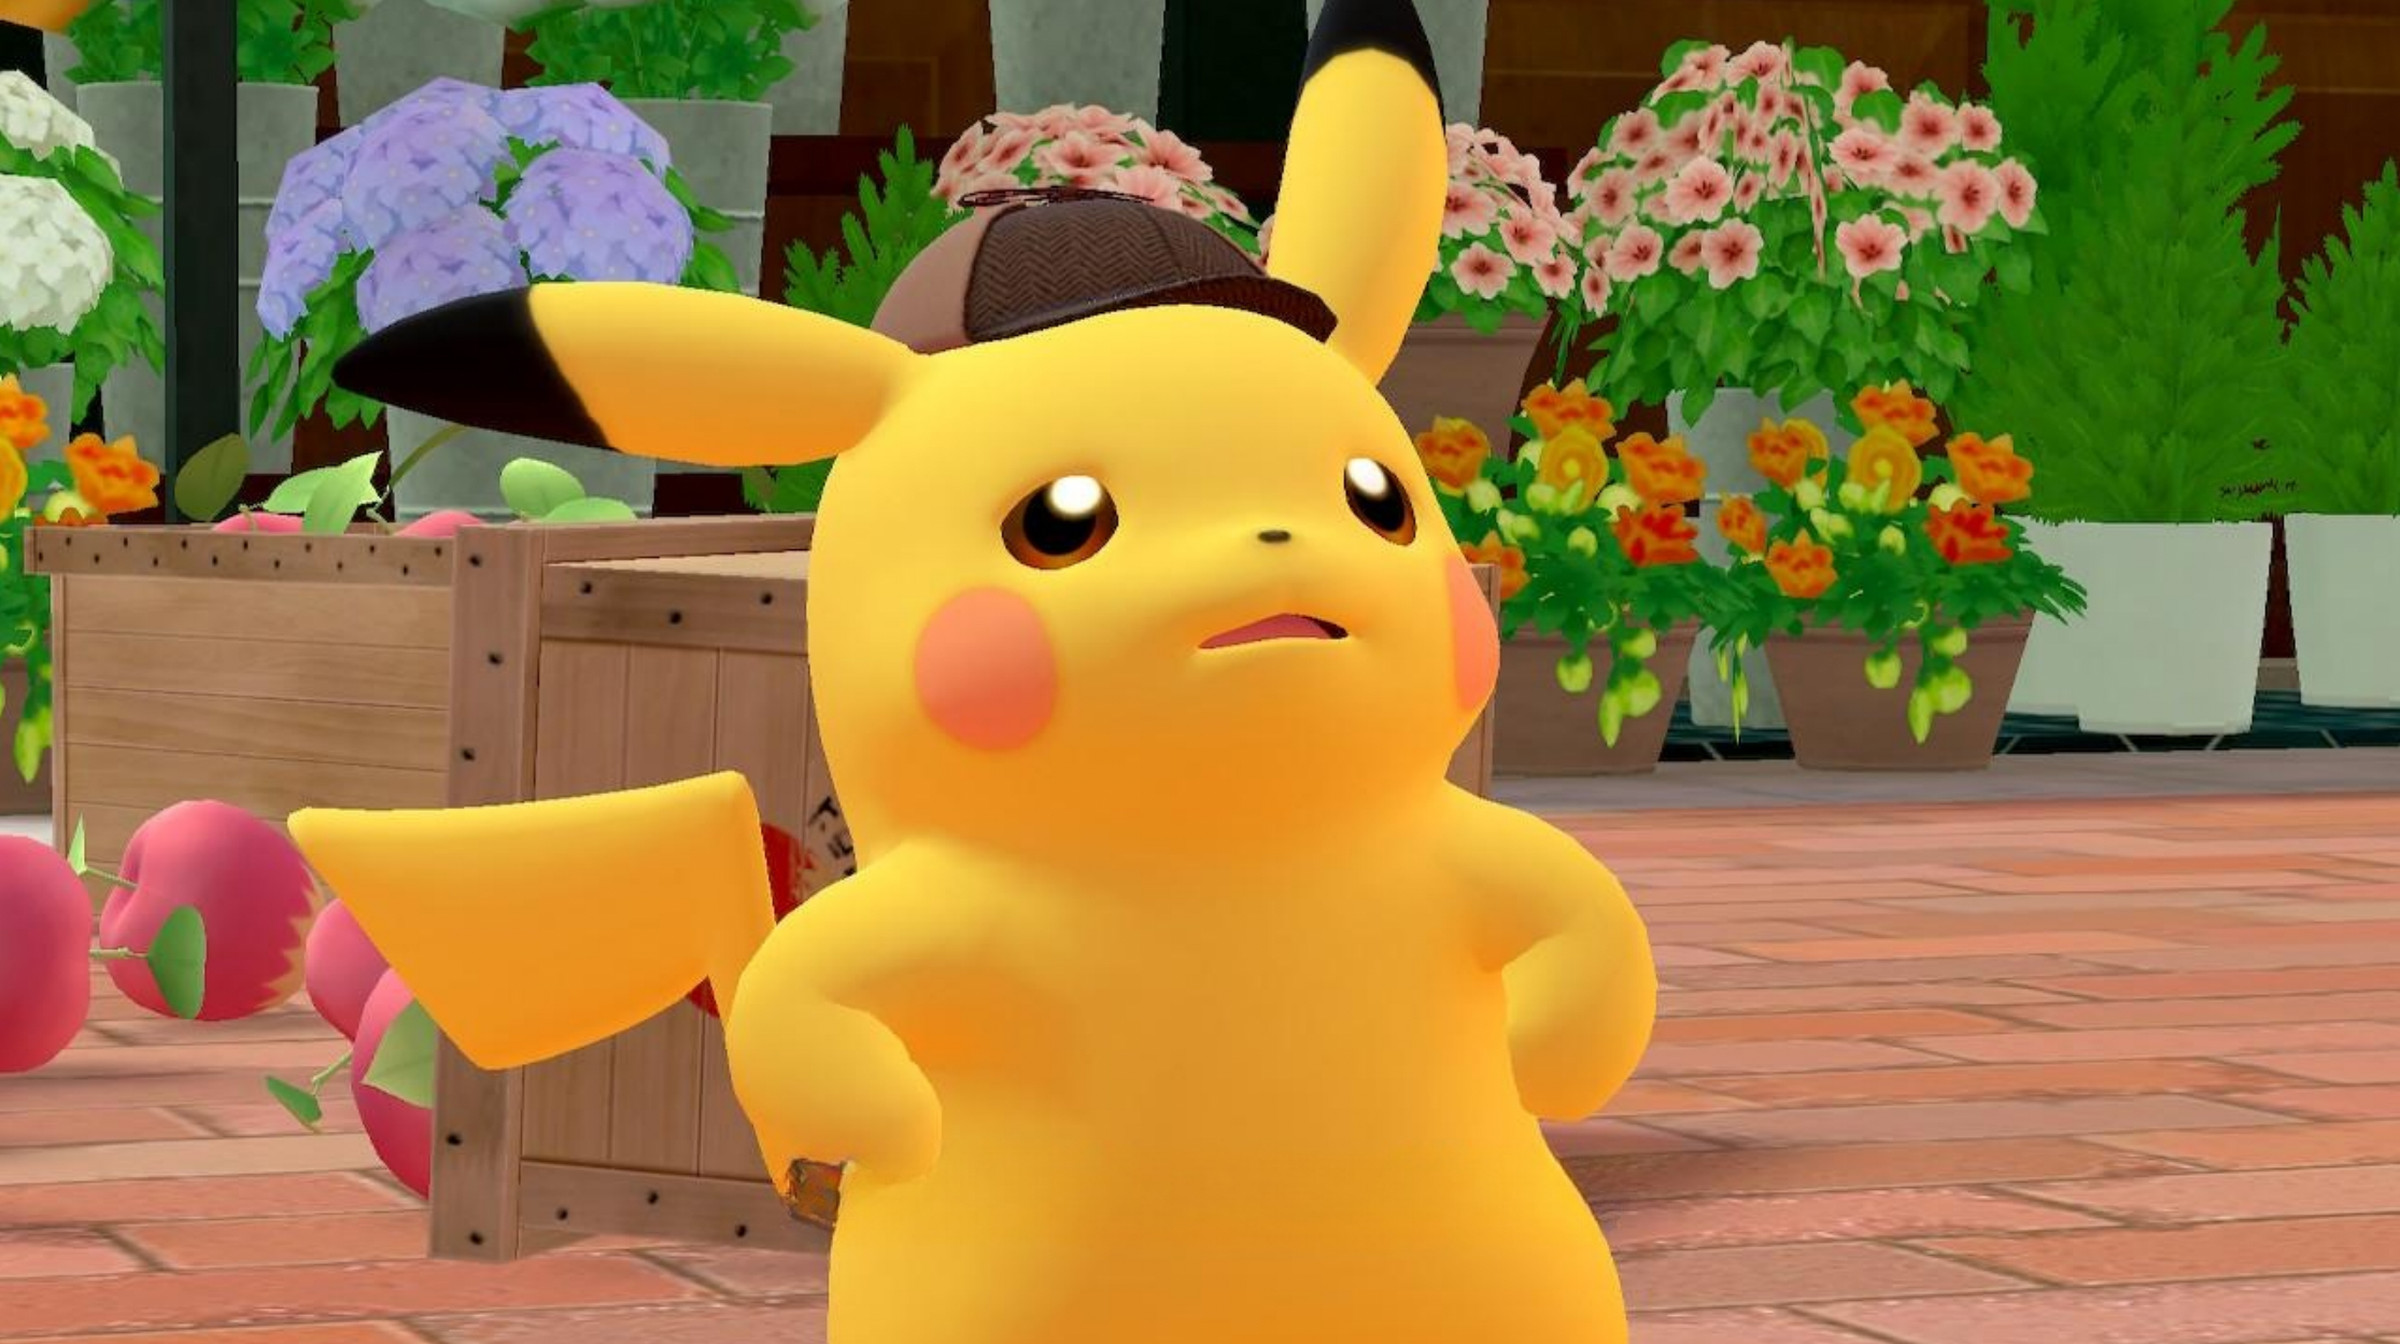 A pikachu wearing a detective’s hat, and standing with his paws on his hips in front of a couple of overturned apple crates.